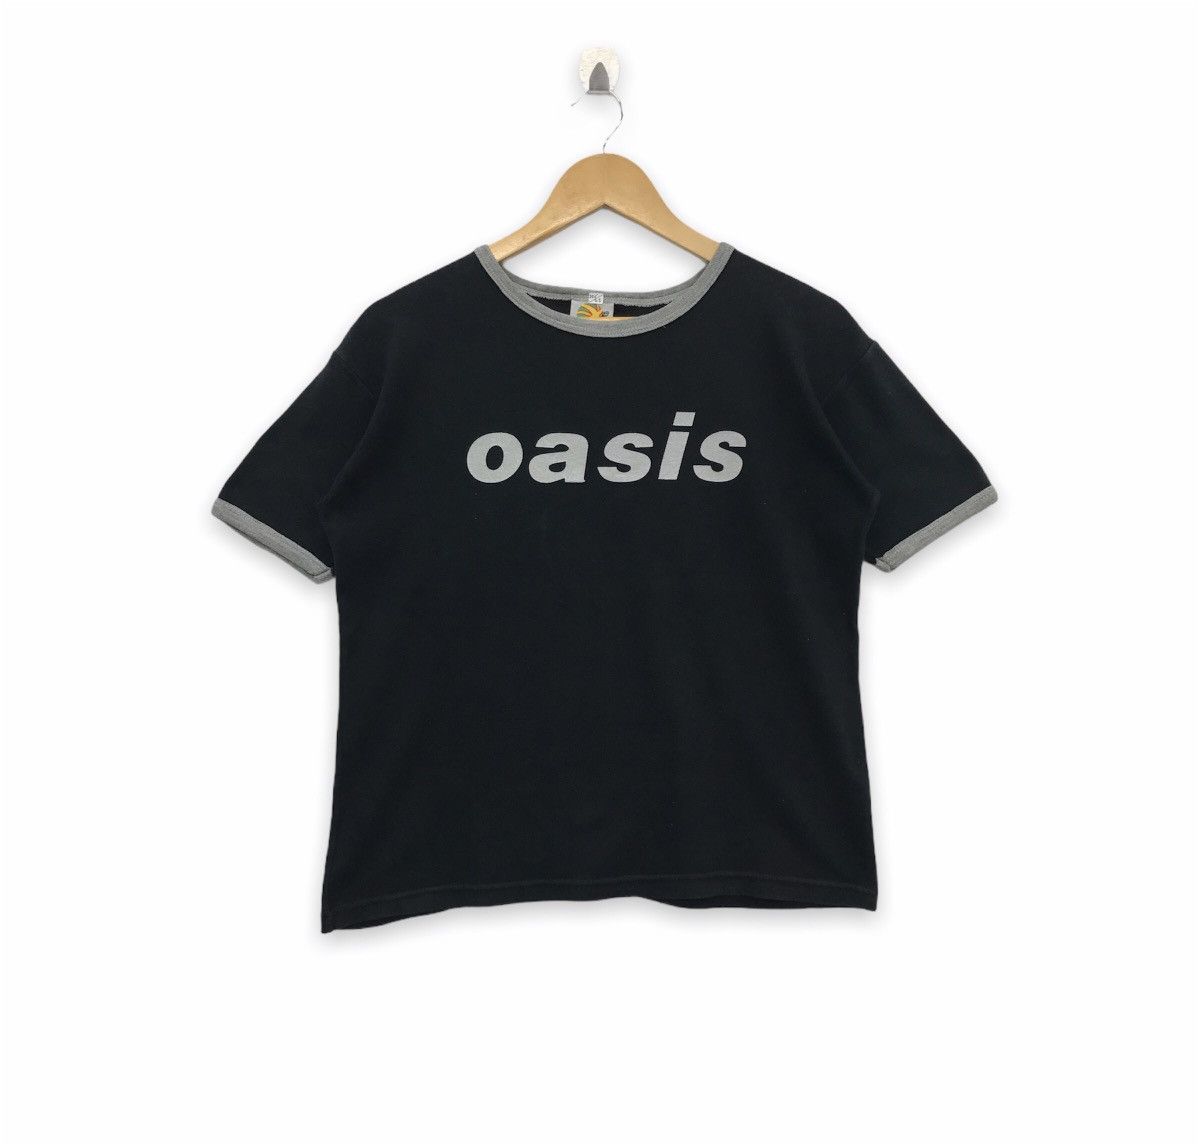 Pre-owned Band Tees X Vintage Band Tees Oasis Spell Out In Black